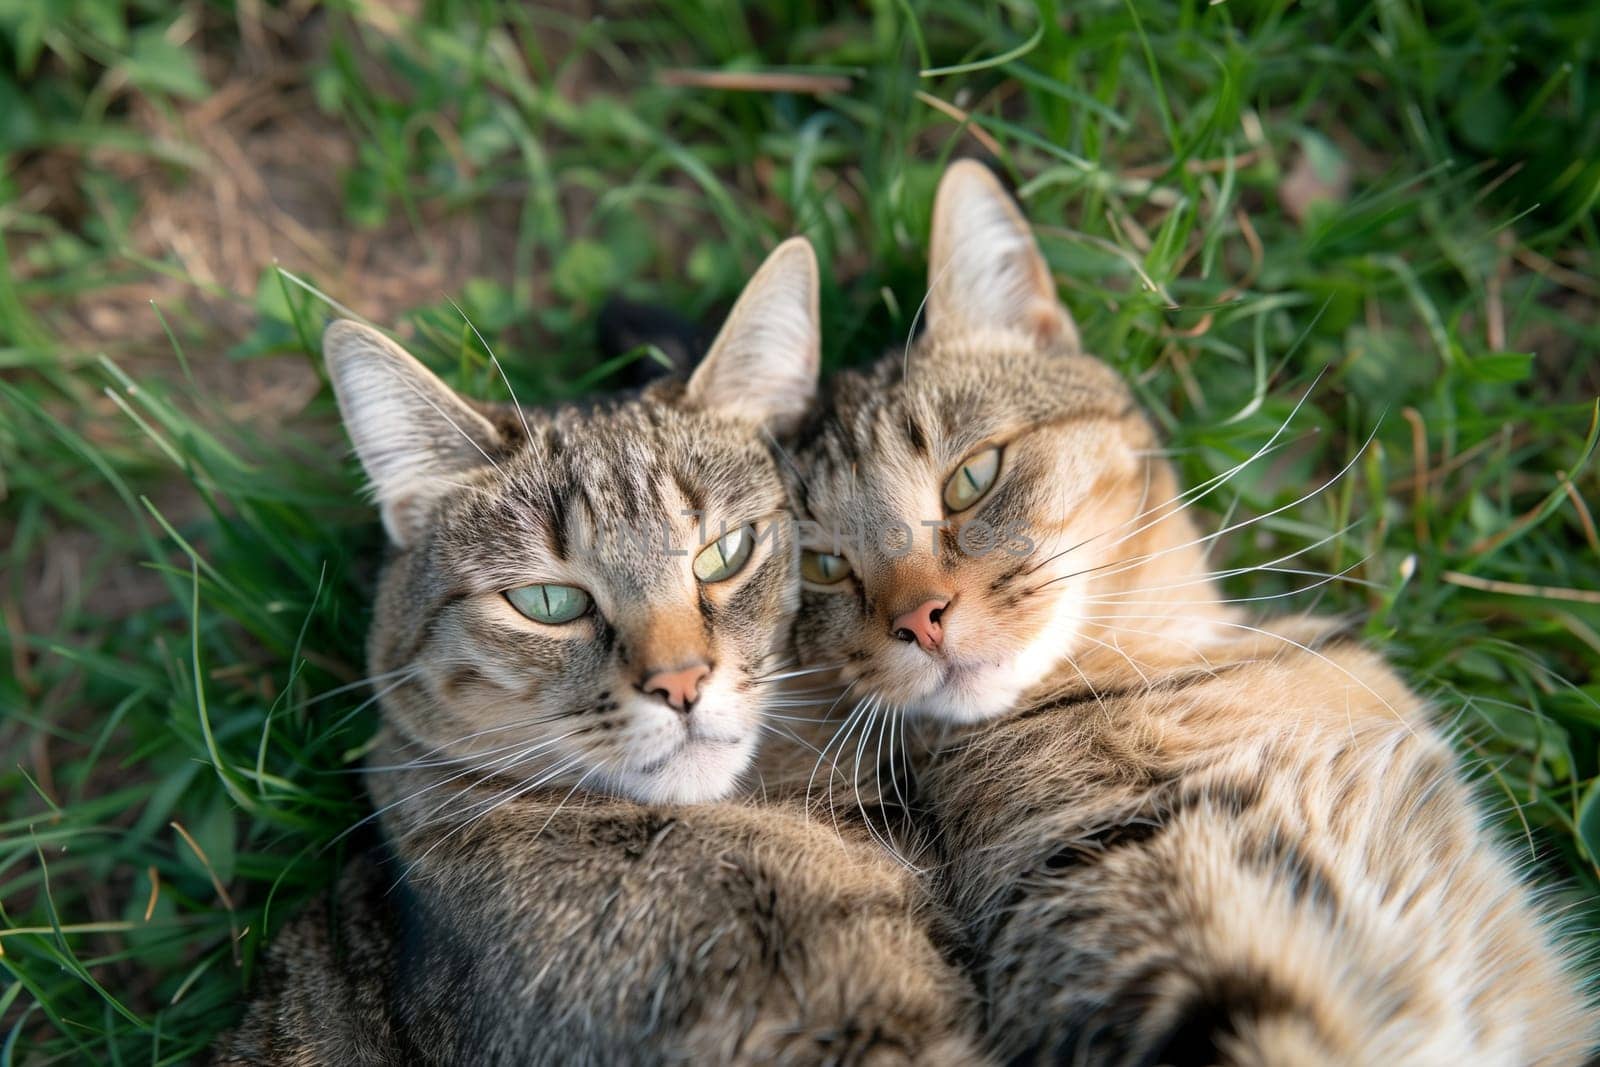 Two Adorable Cats Snuggling Together on Lush Grass Celebrating Selfie Day by Sd28DimoN_1976